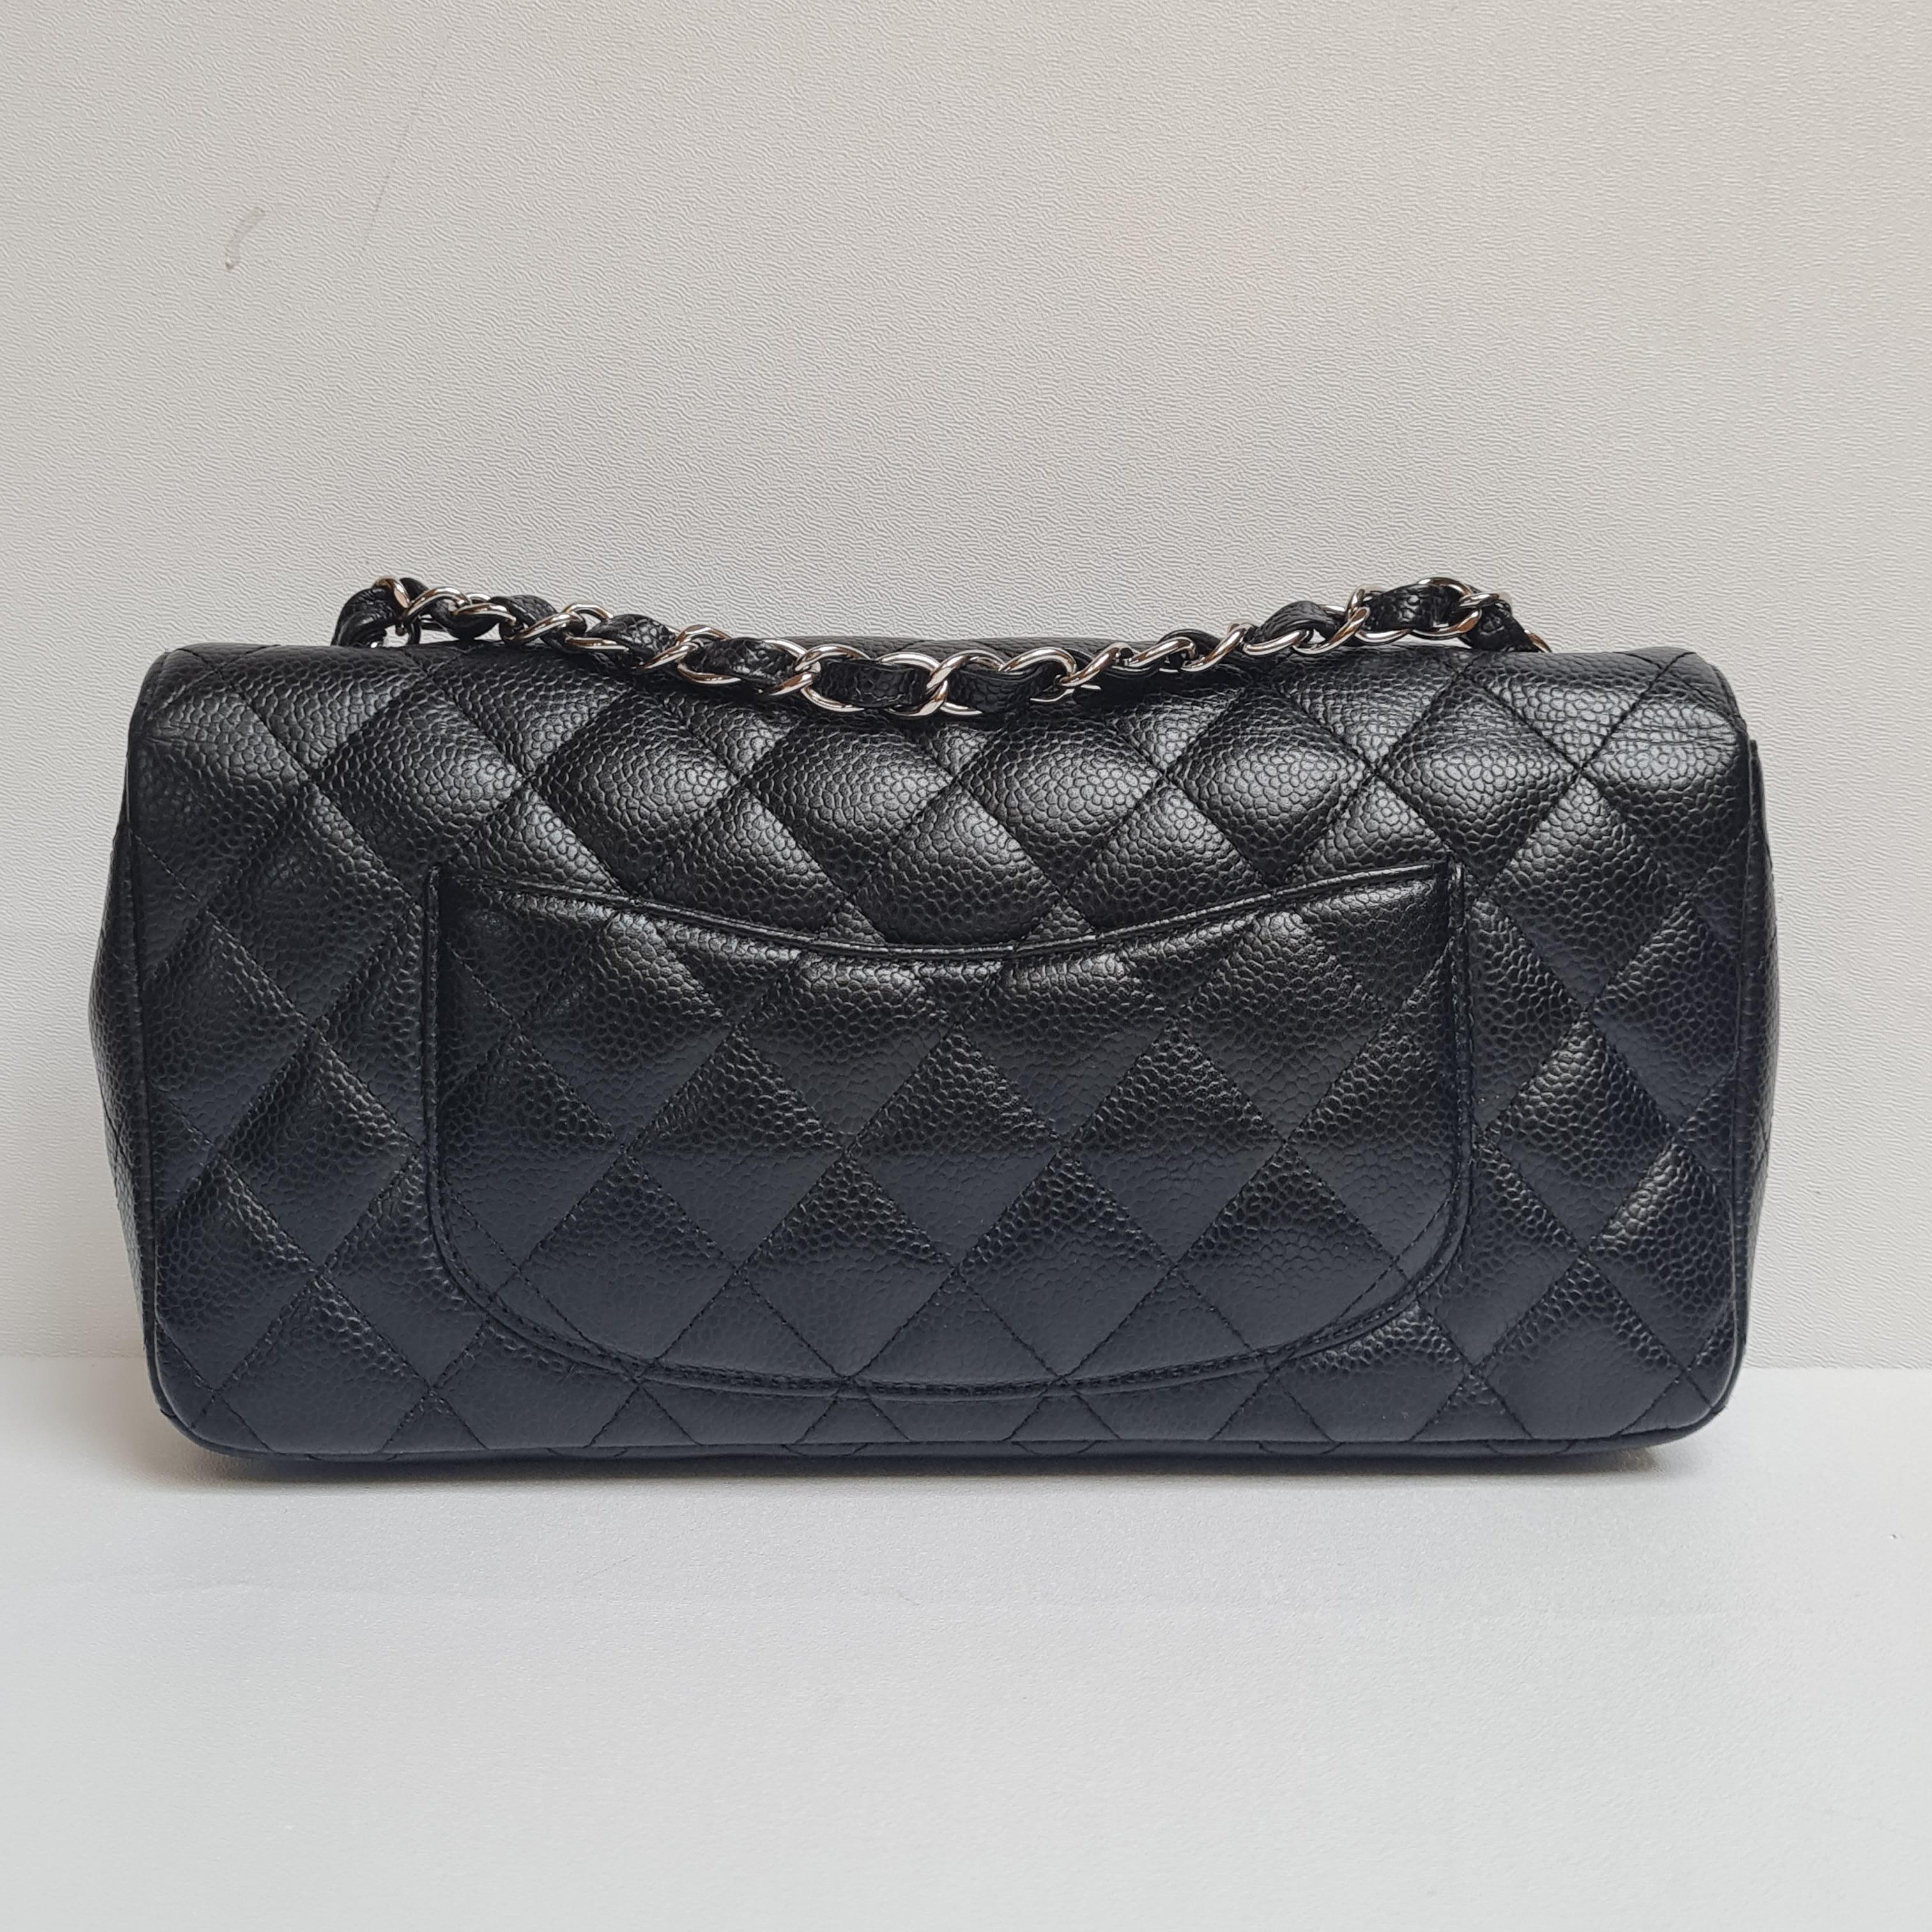 Chanel Black Caviar Quilted East West SHW Flap Bag In Good Condition In Jakarta, Daerah Khusus Ibukota Jakarta